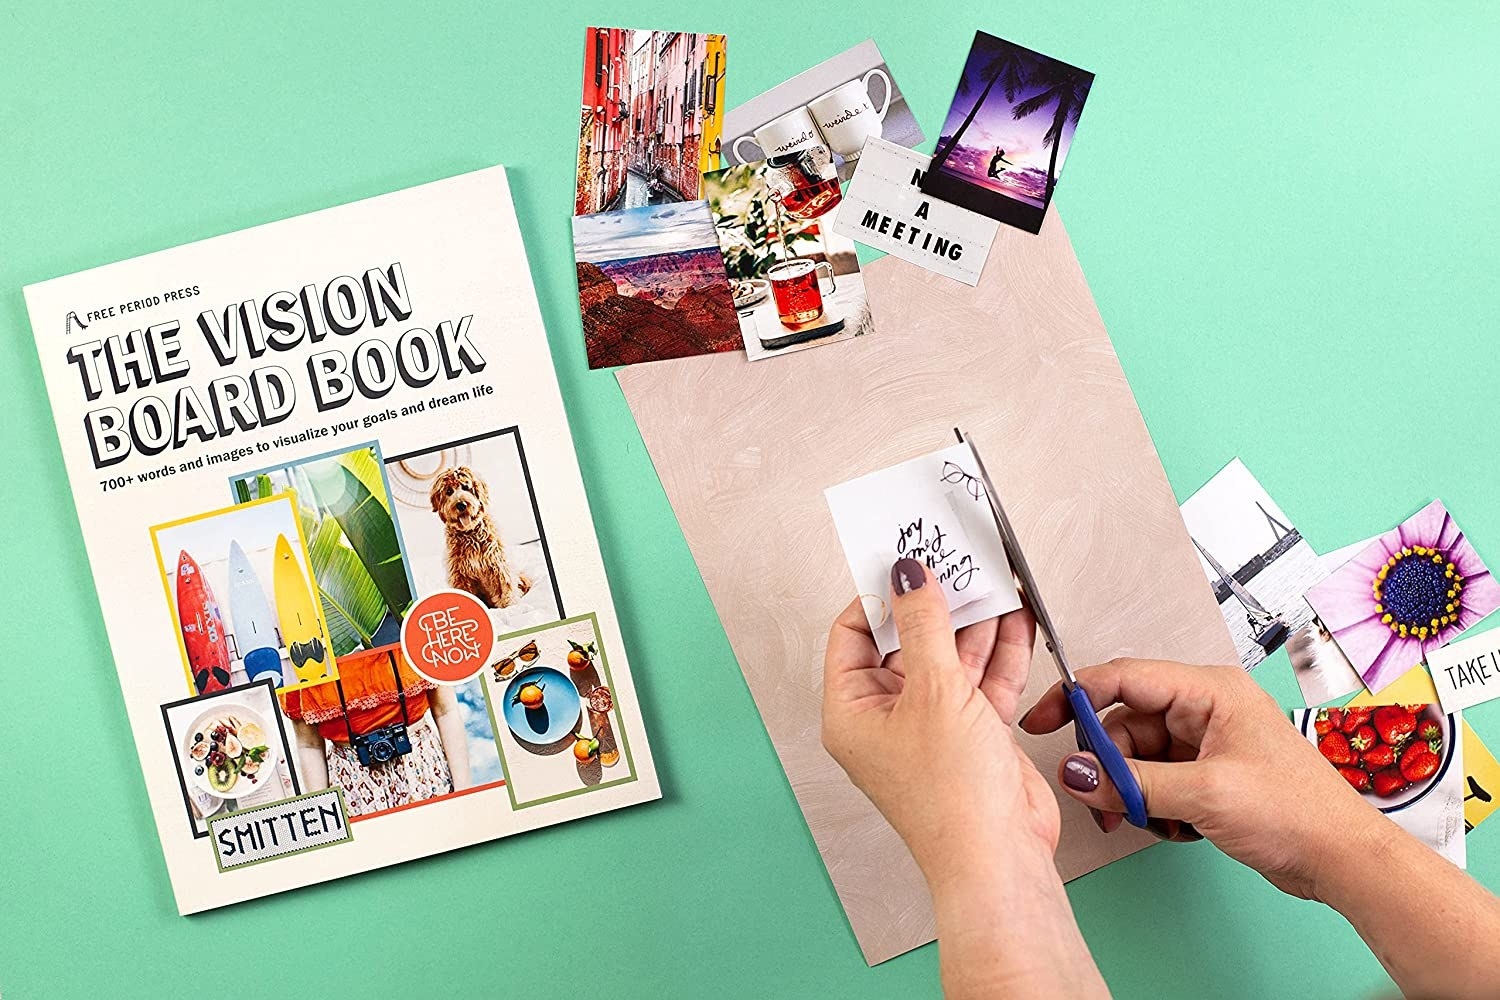 model cutting paper from the book to create a vision board